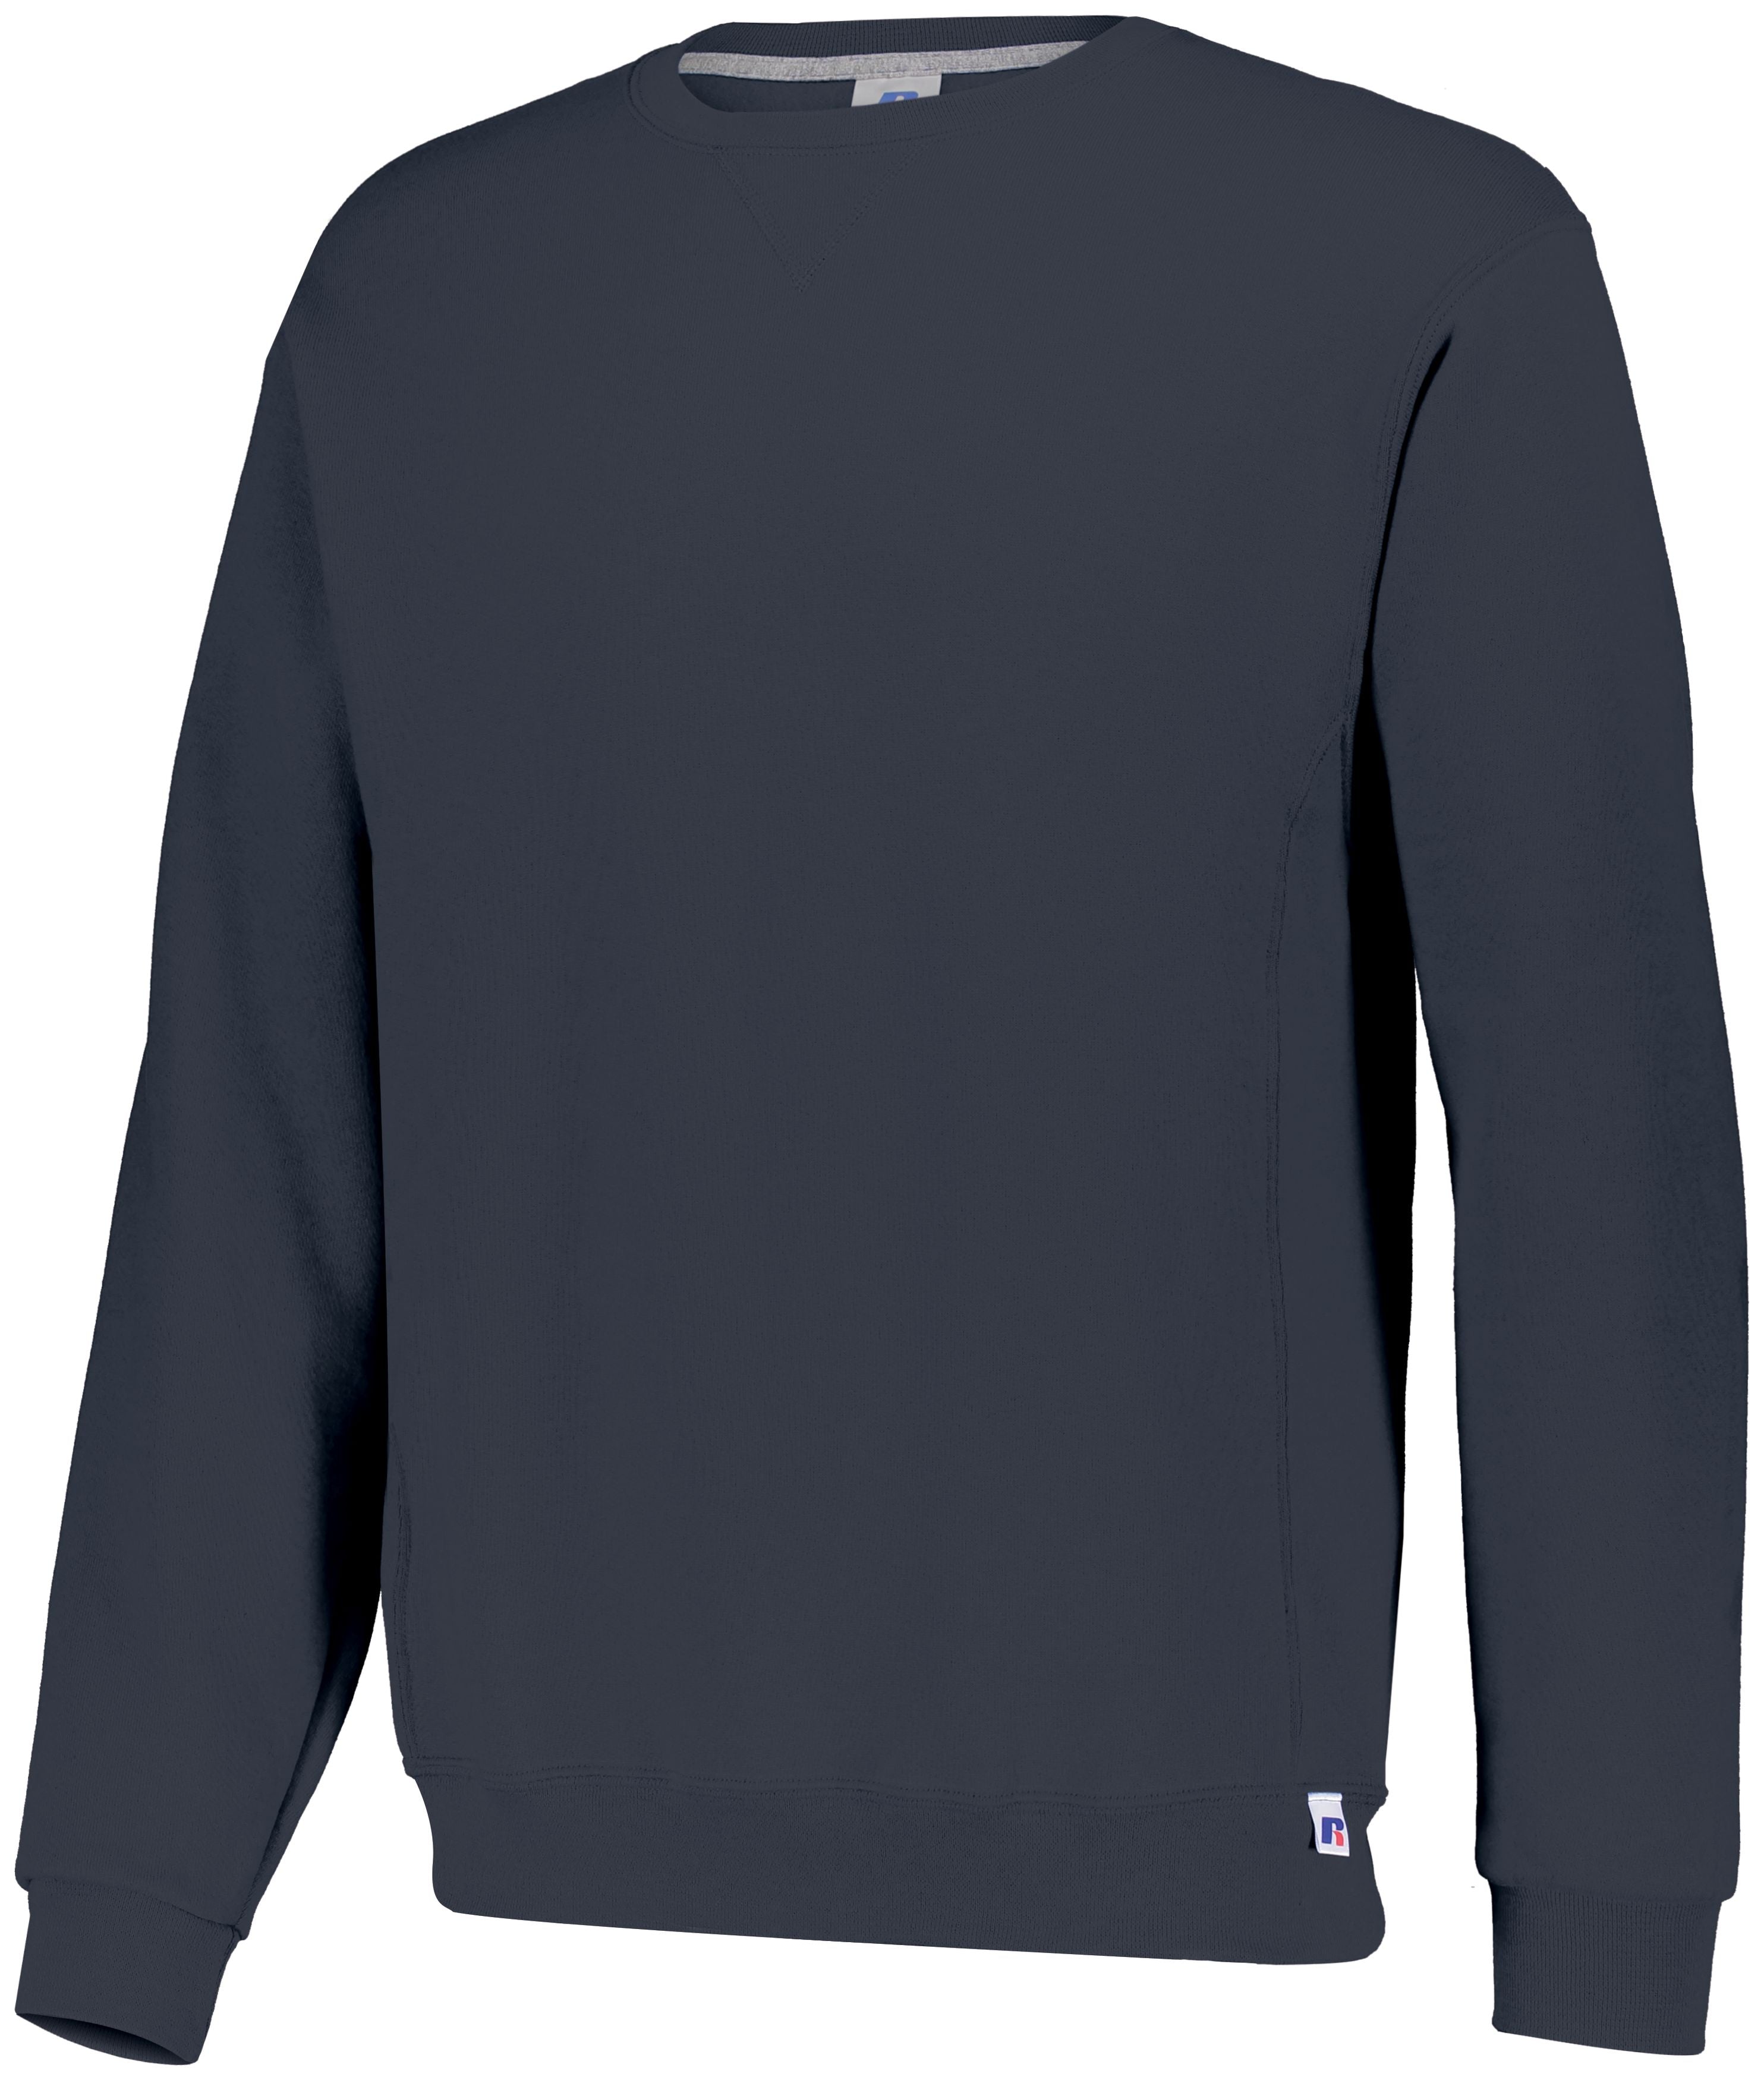 Russell Athletic Dri-Power  Fleece Crew Sweatshirt in Black Heather  -Part of the Adult, Adult-Sweatshirt, Russell-Athletic-Products, Outerwear product lines at KanaleyCreations.com